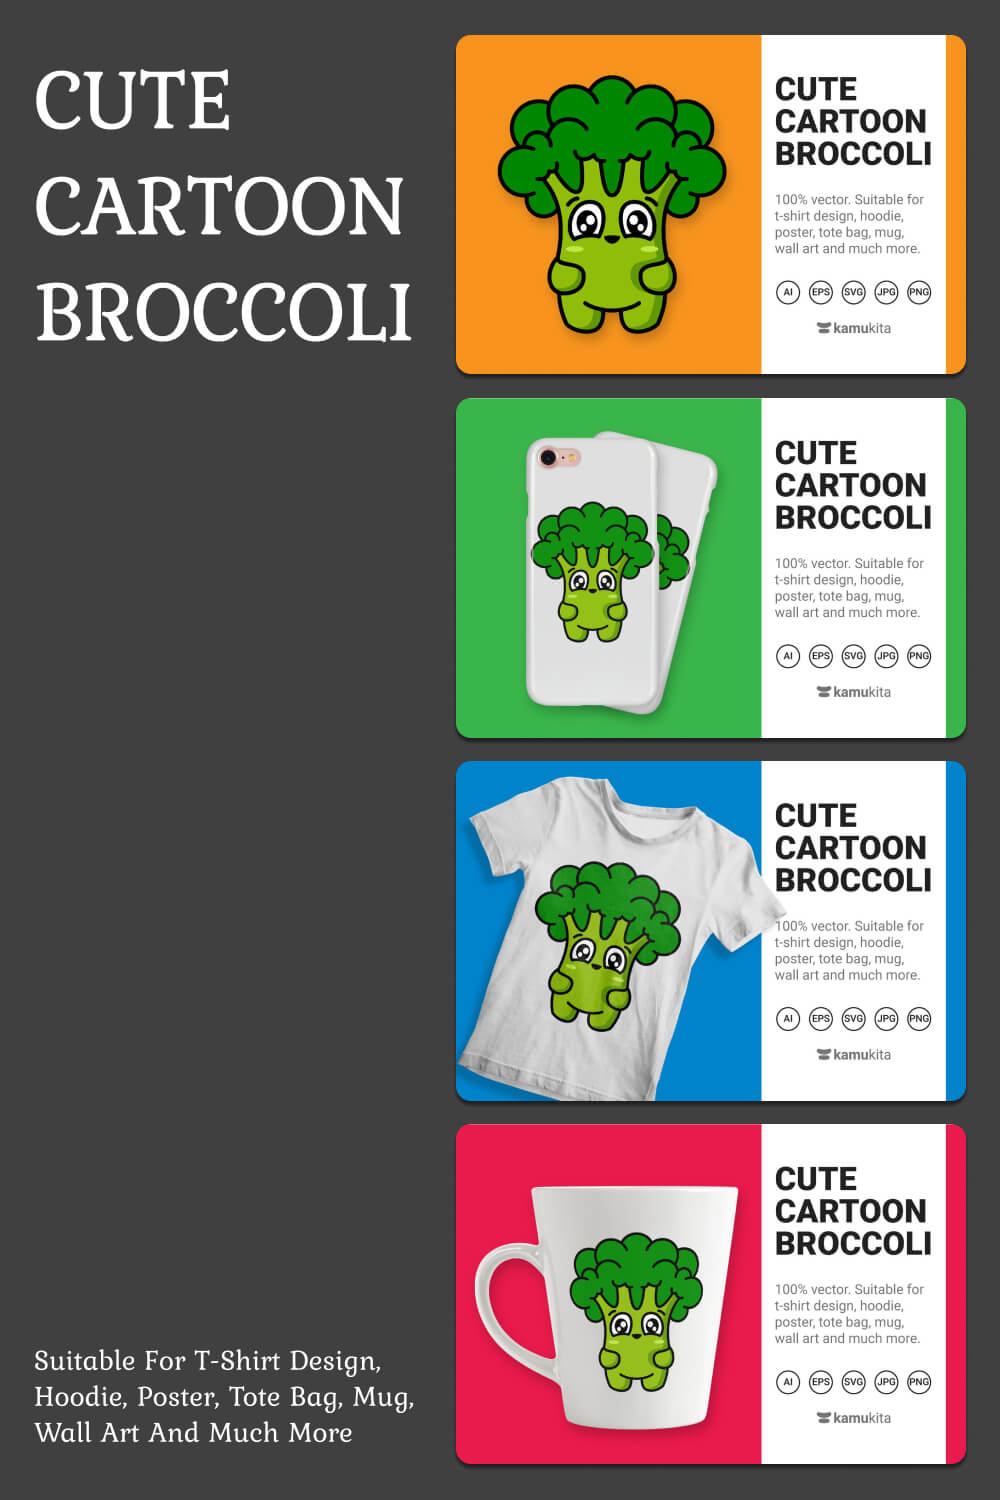 On bright backgrounds, cute broccoli is drawn on everyday things.